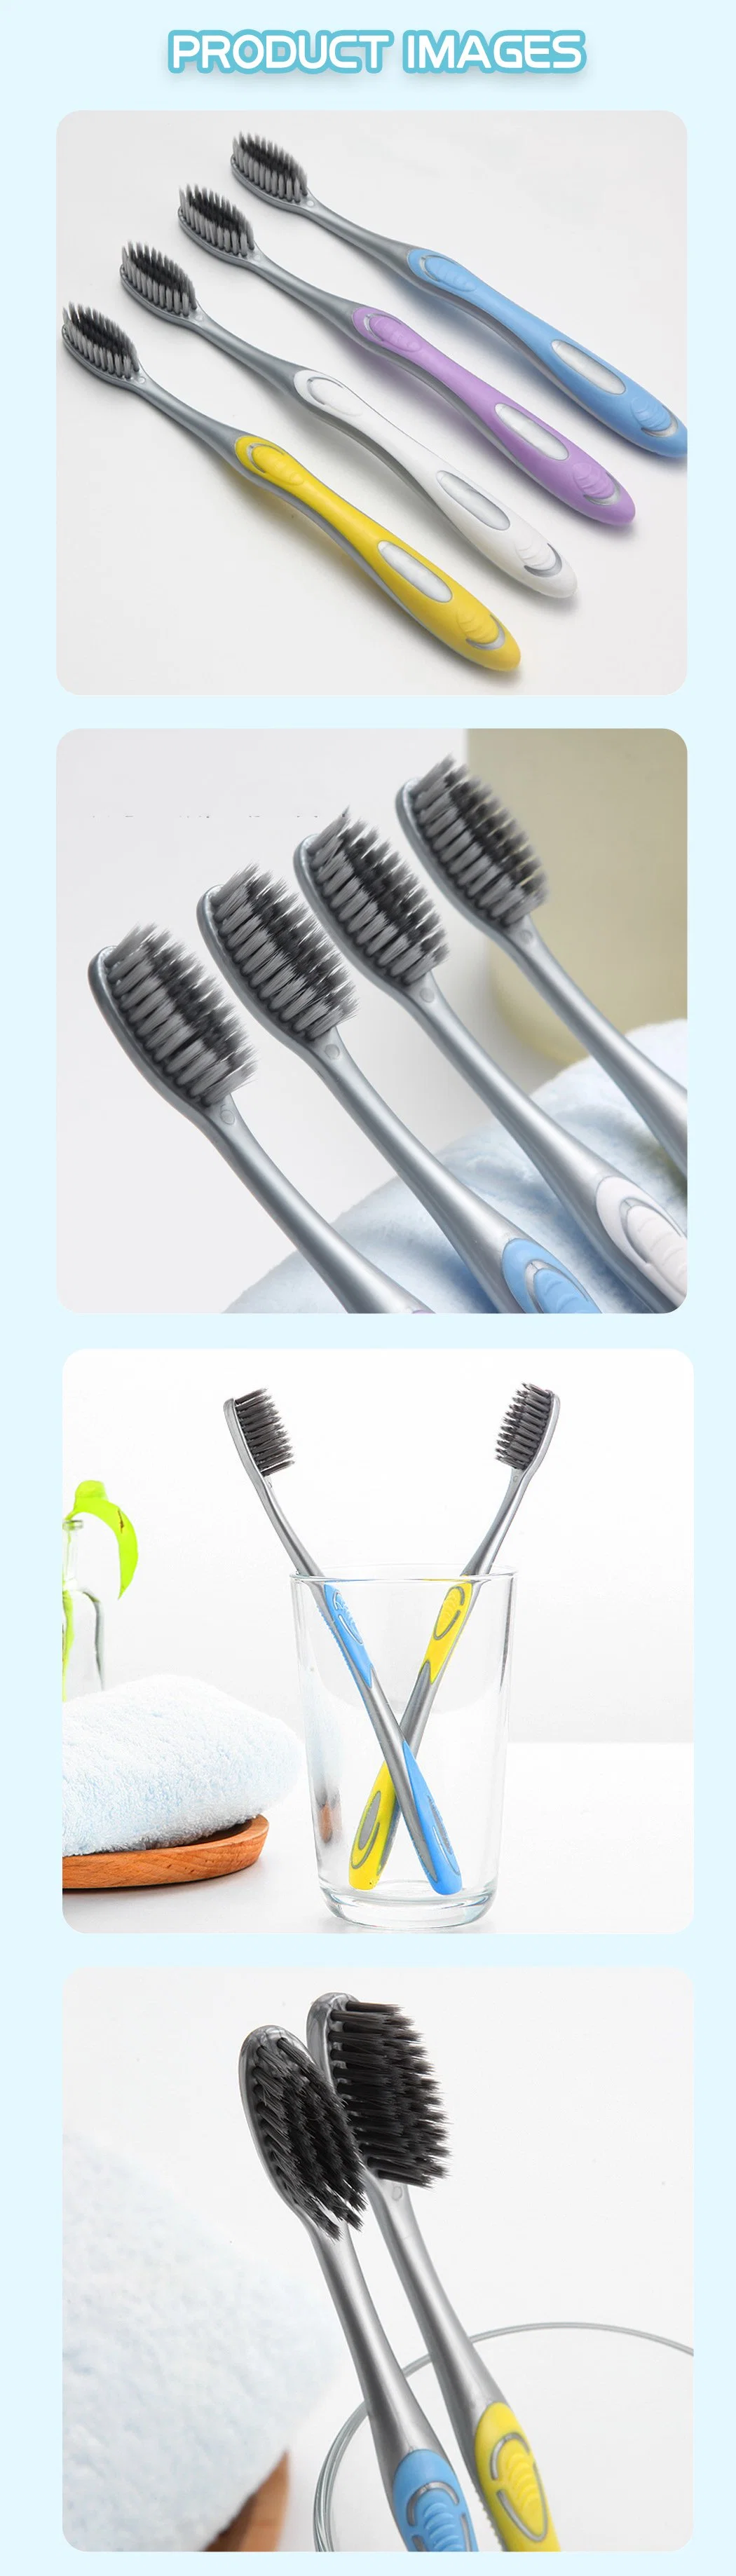 High Quality Oral Care Bamboo Charcoal Bristle Teeth Whitening Adult Toothbrush